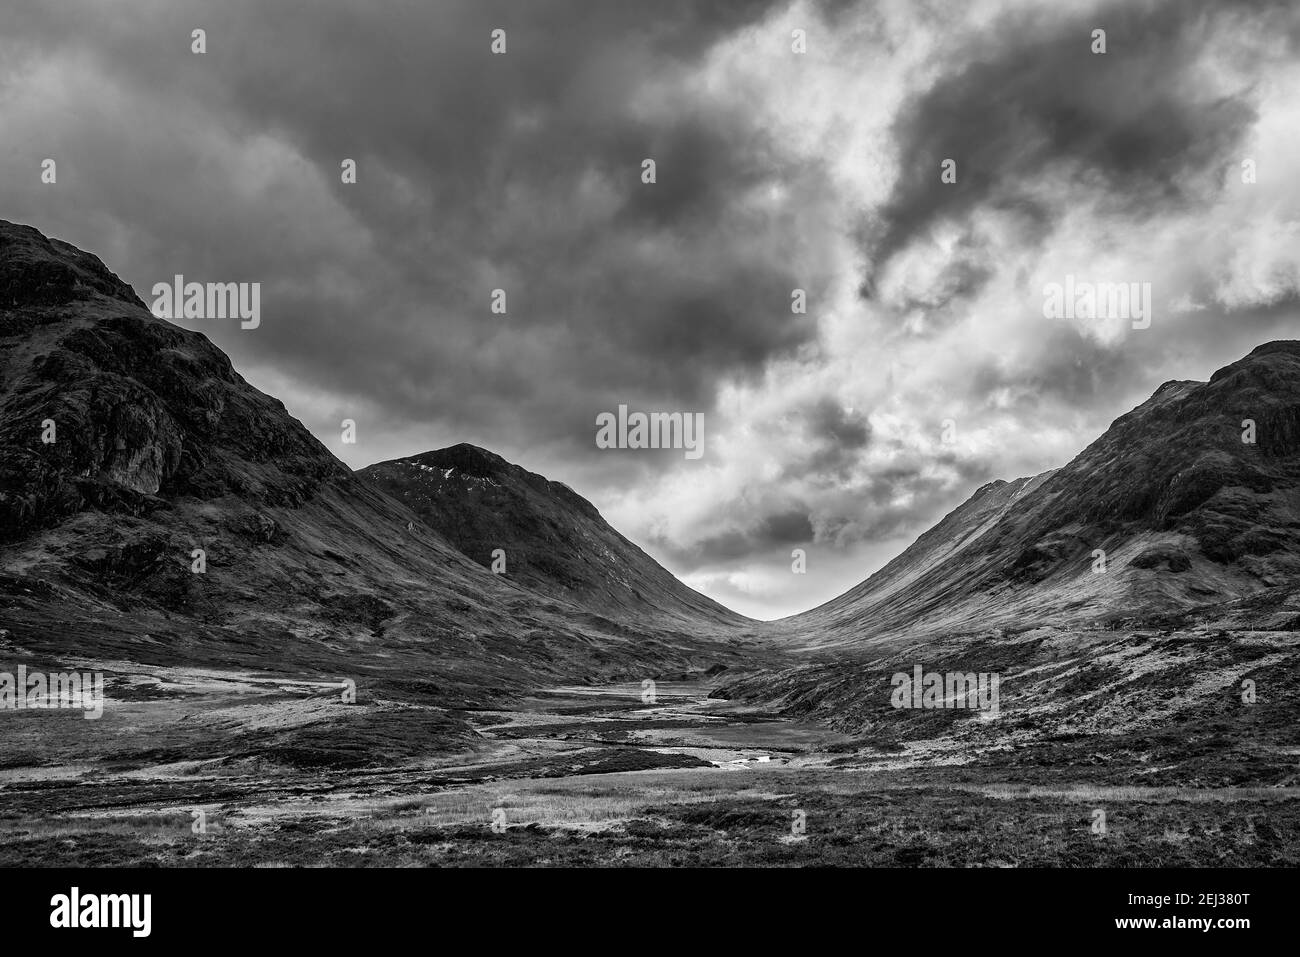 Stunning  black and white landscape image view down Glencoe Valley in Scottish Highlands with mountain ranges in dramatic Winter lighting Stock Photo